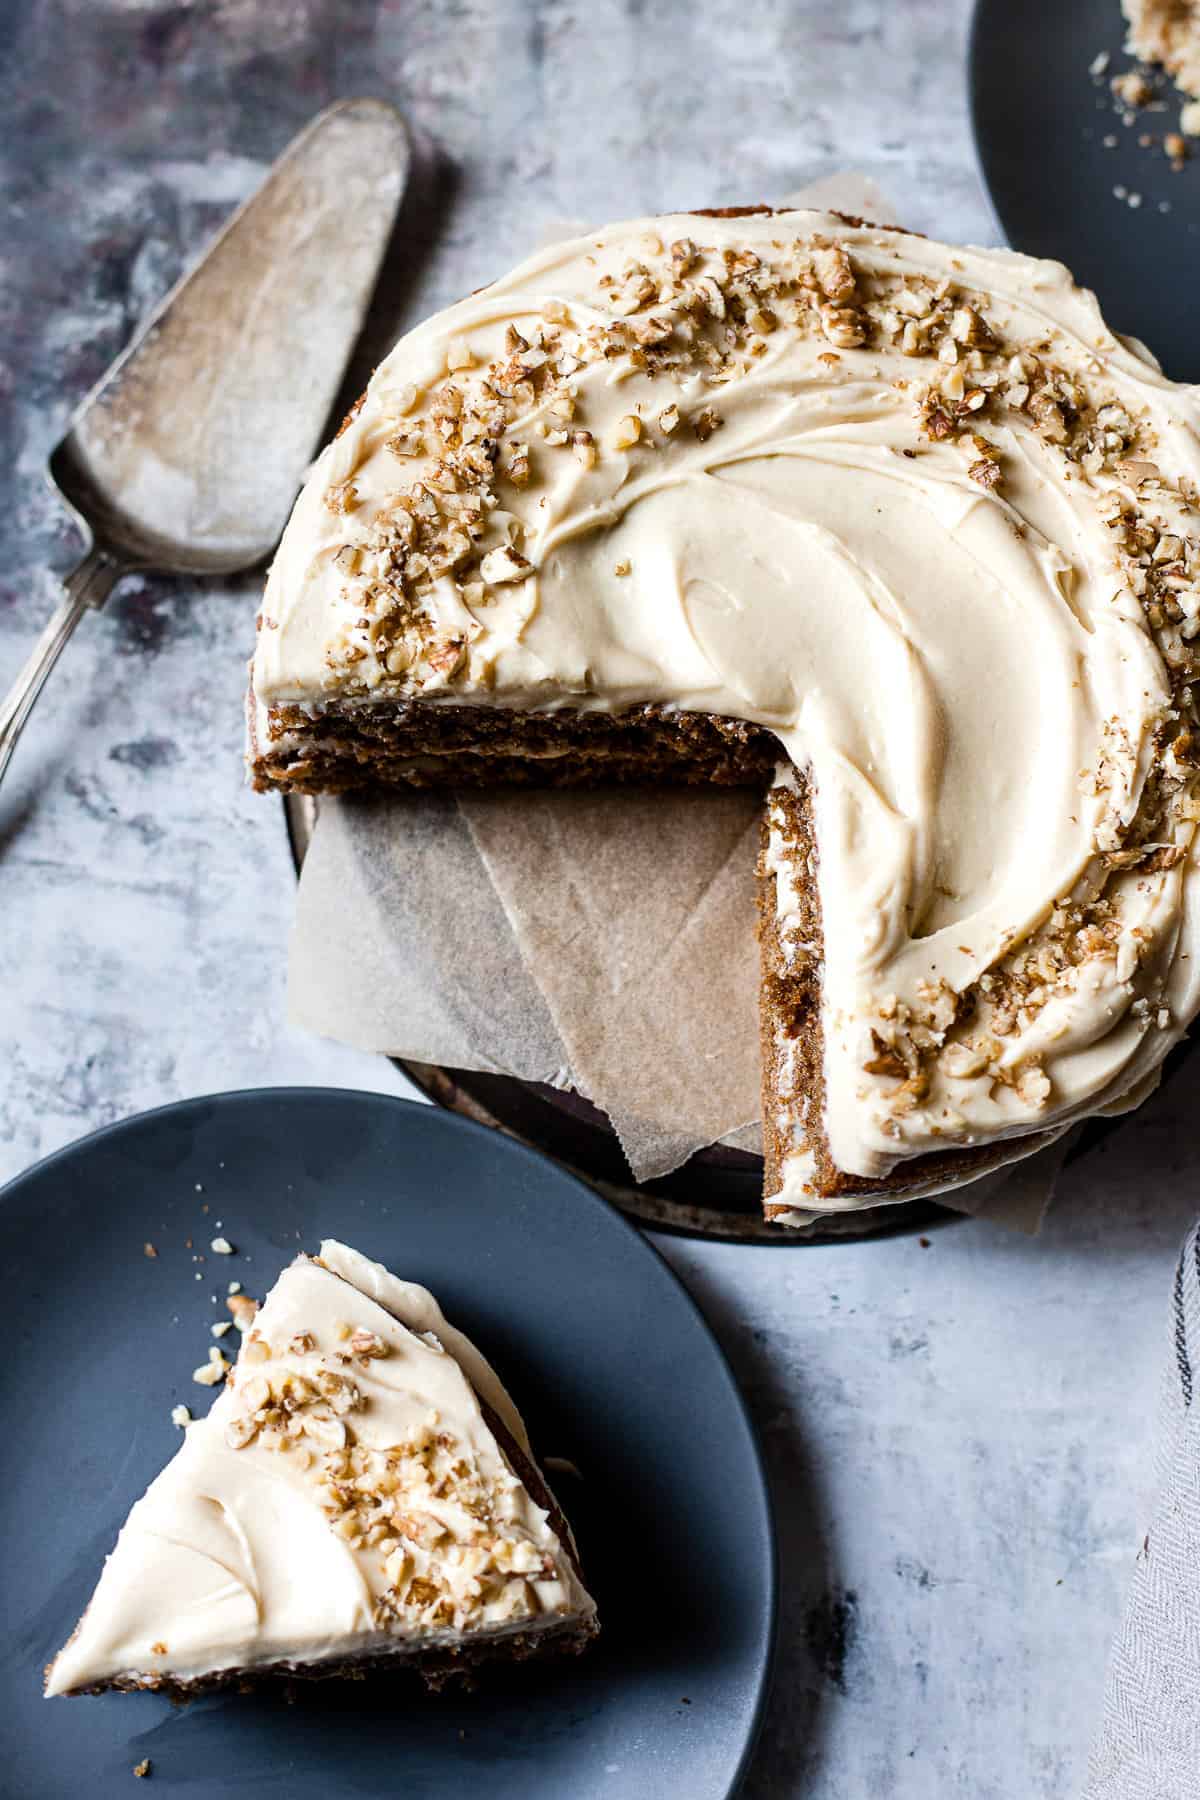 soft and fluffy coffee walnut cake on a blue plate. Aldi ingredients.